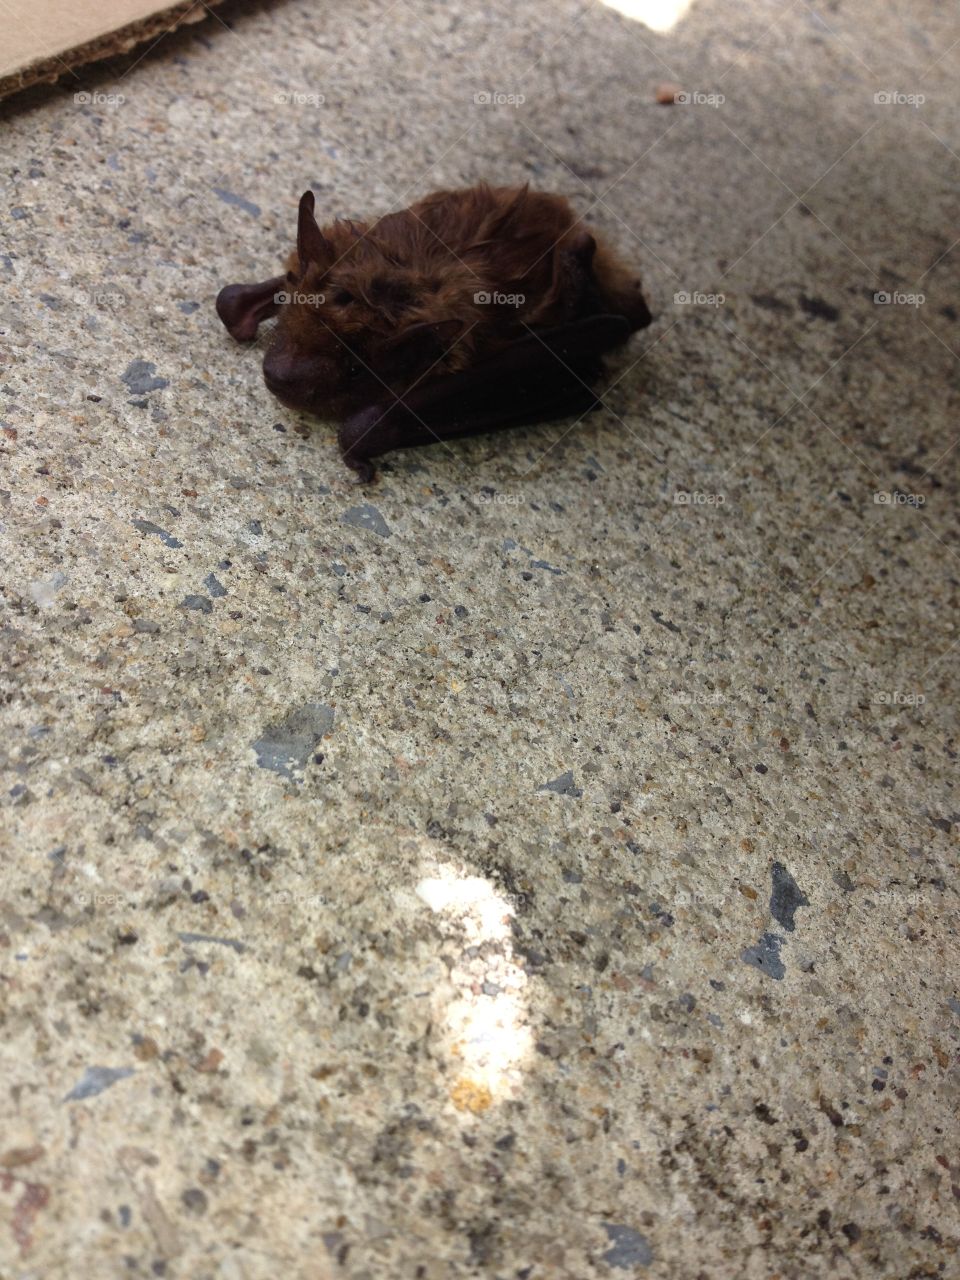 Poor lil bat was hurt and I saved him.